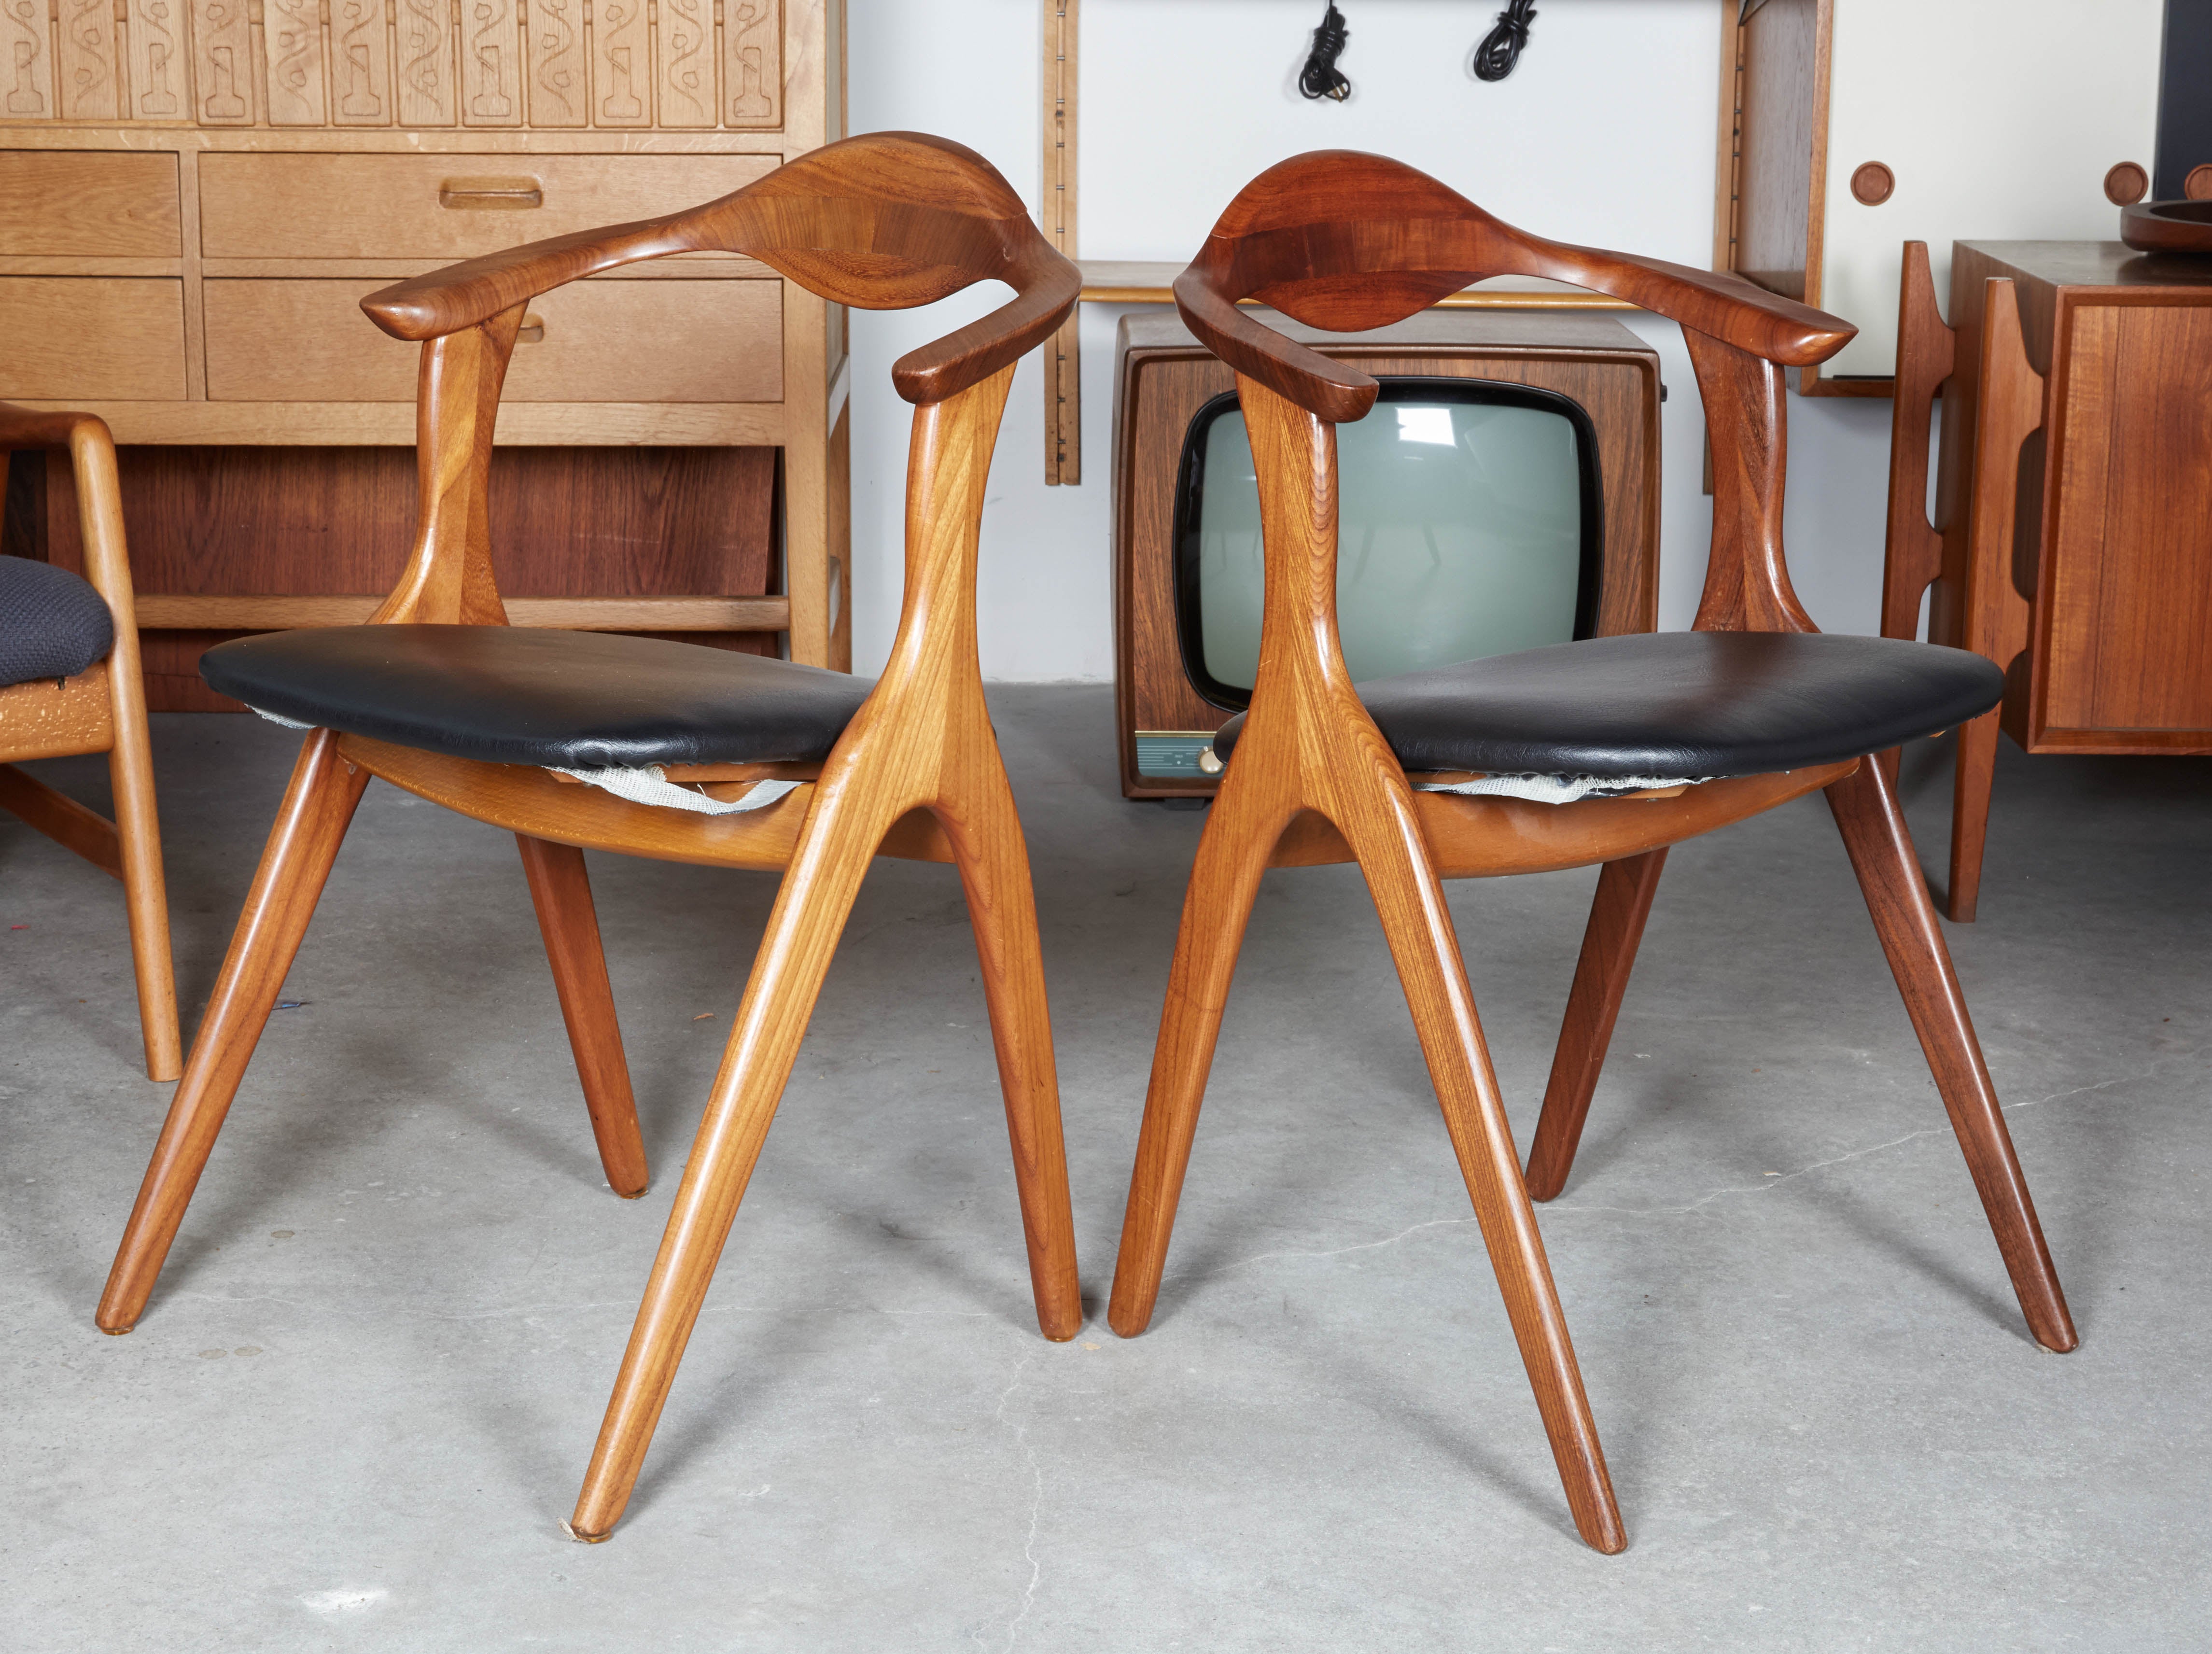 Danish Occasional Armchairs by Aksel and Bender Madsen, Pair